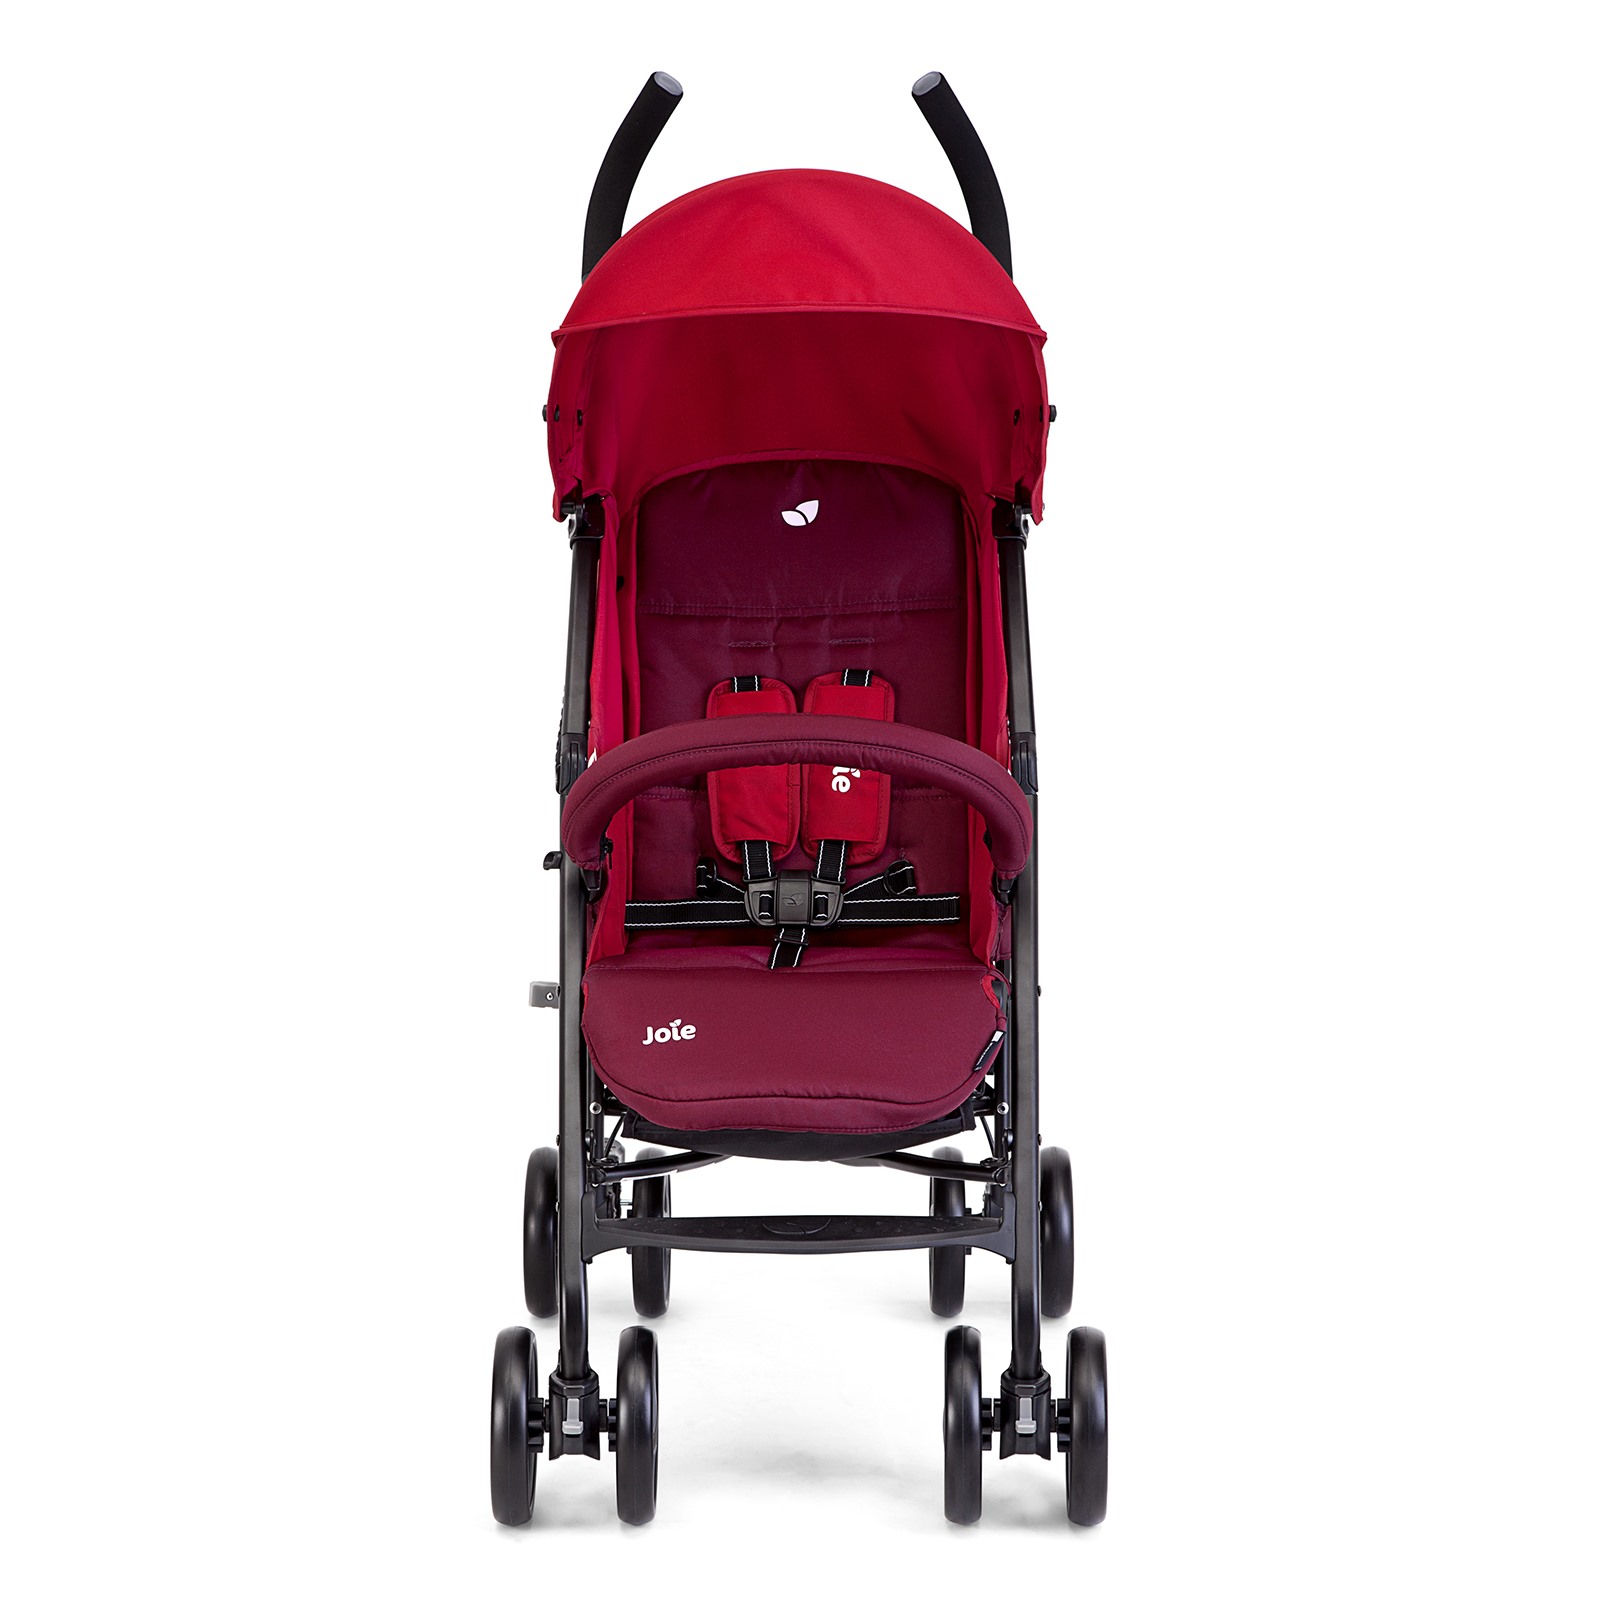 joie nitro lx compact stroller